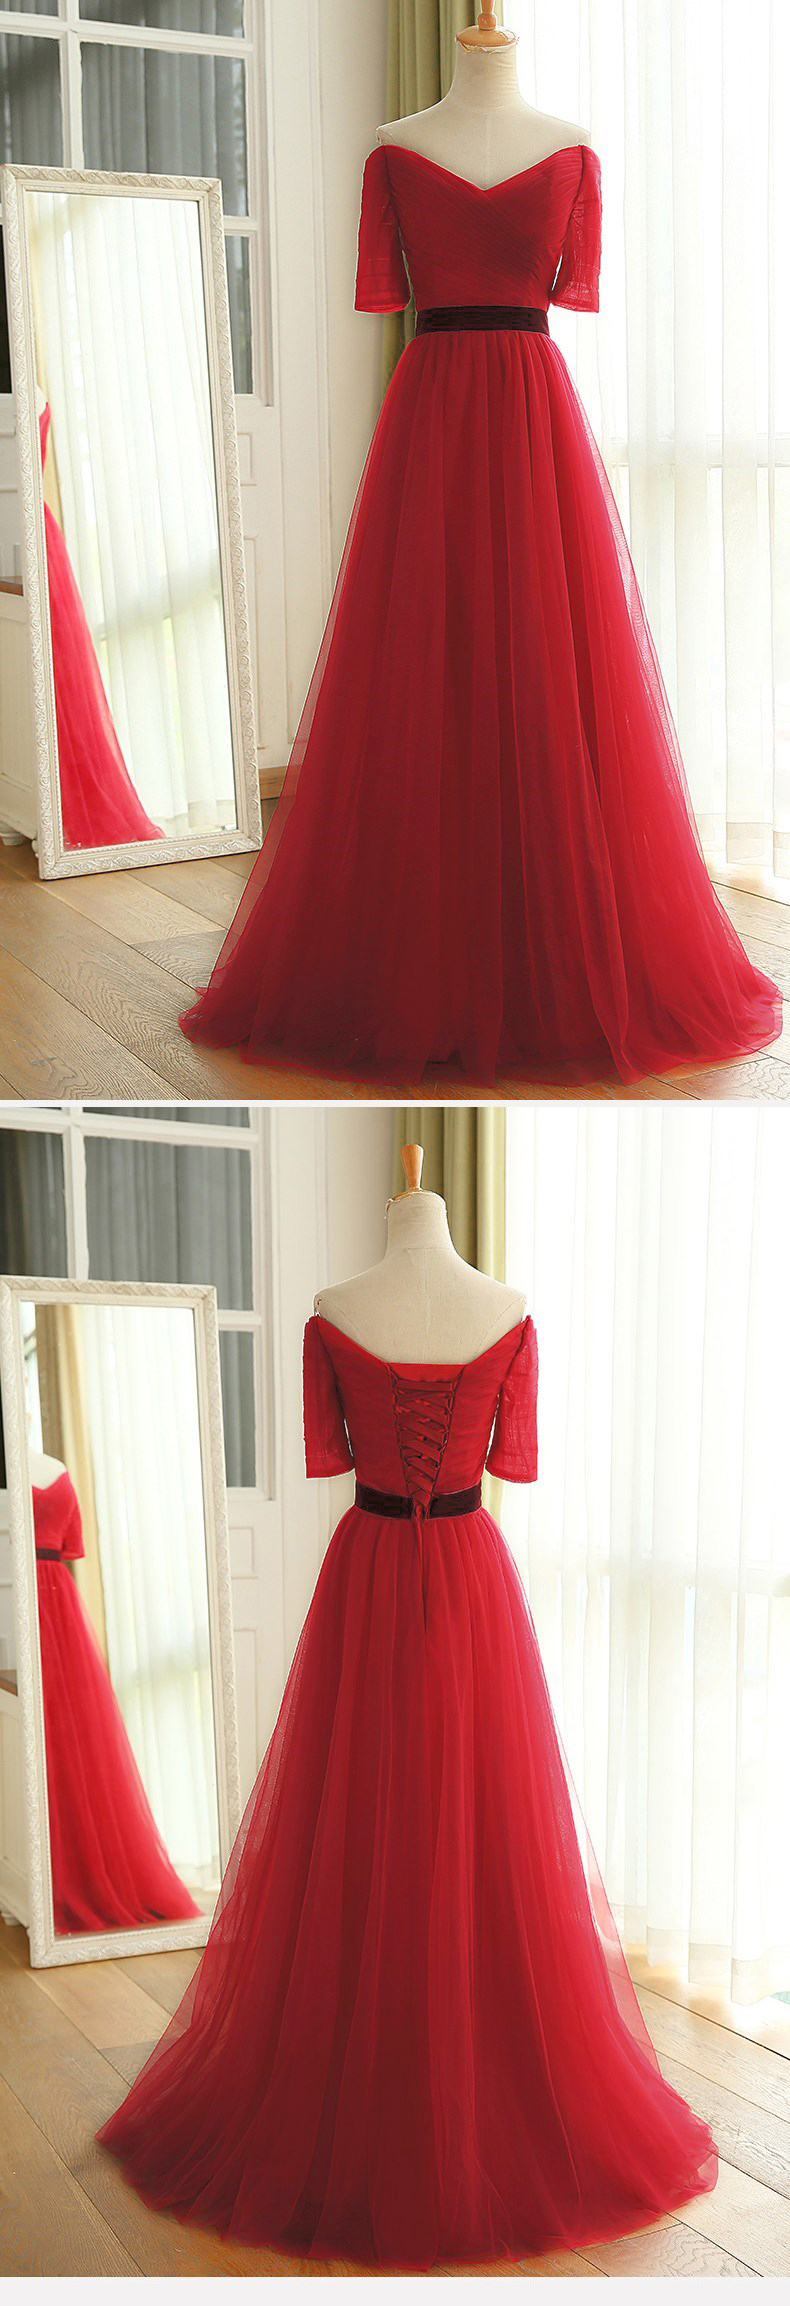 Modest A Line Half Sleeve Red Tulle Floor Length Prom Dresses